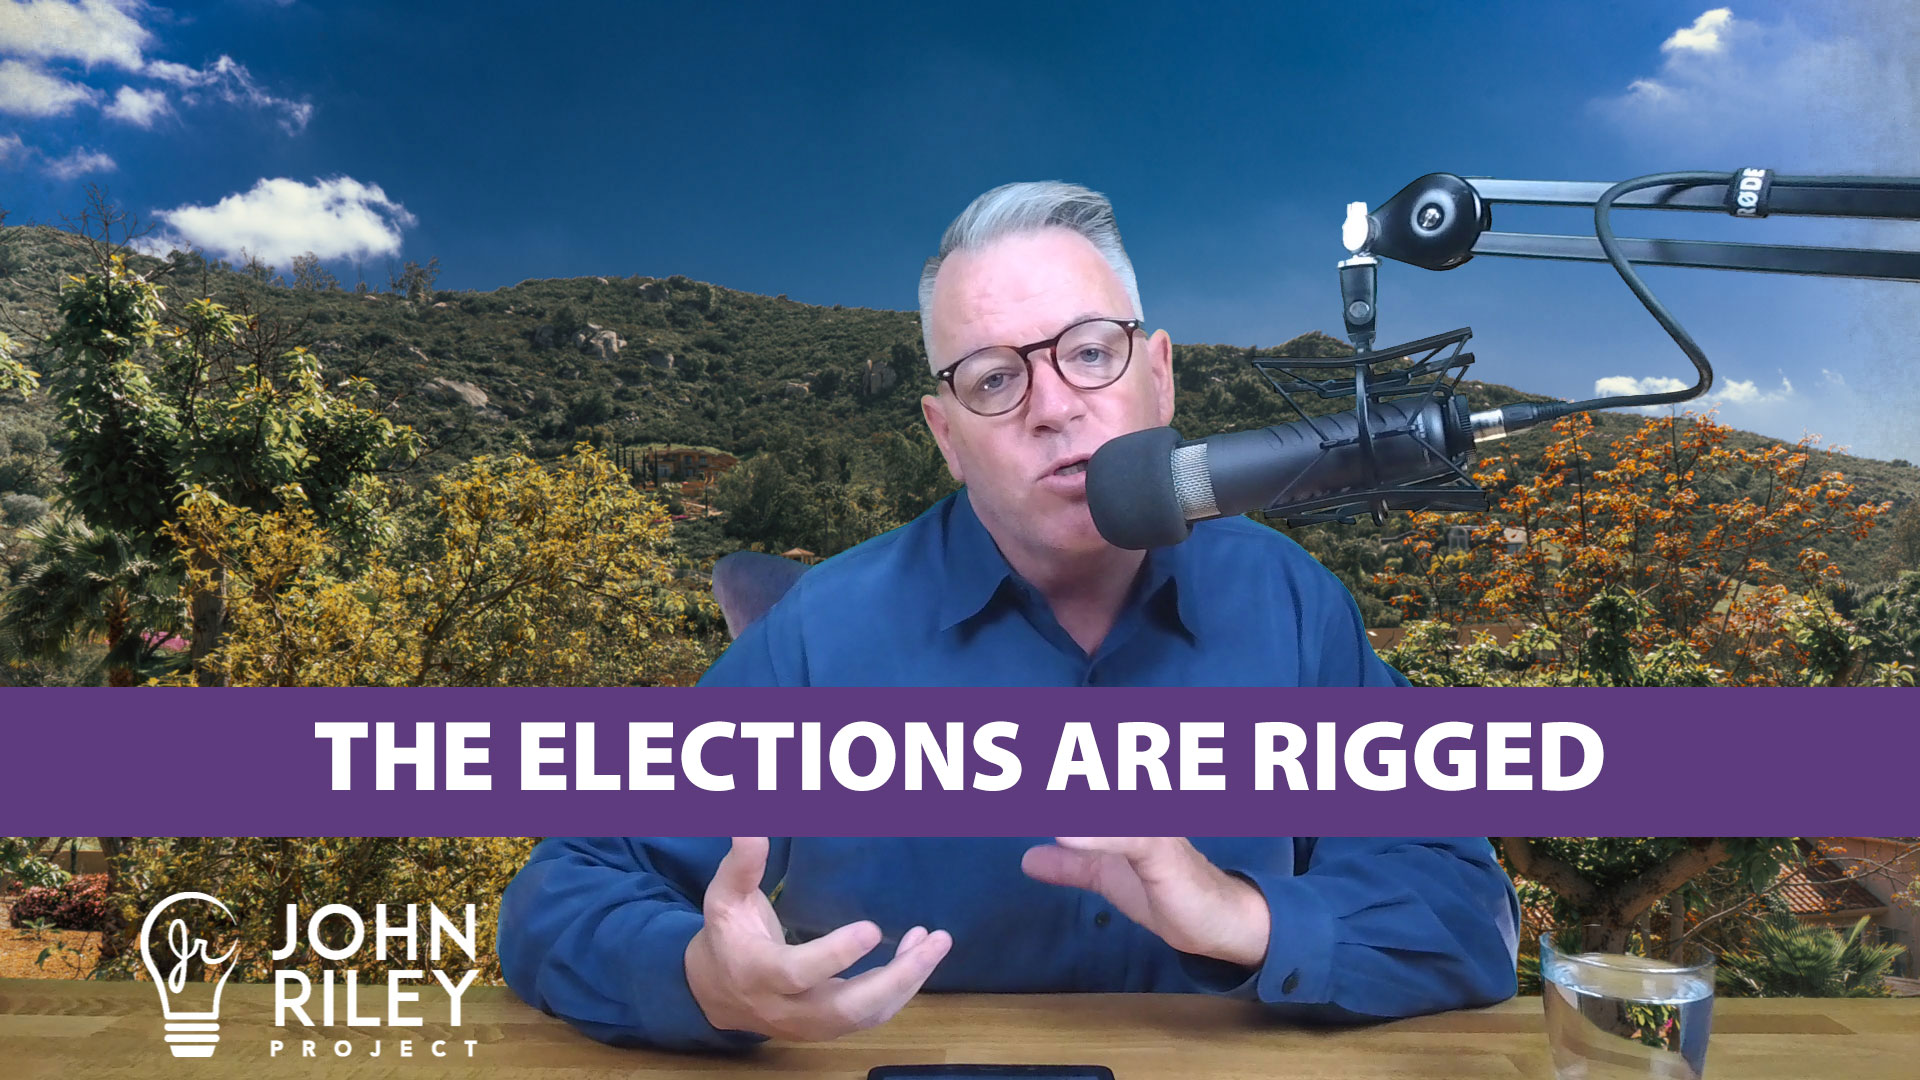 The Election is Rigged, John Riley Project, JRP0080